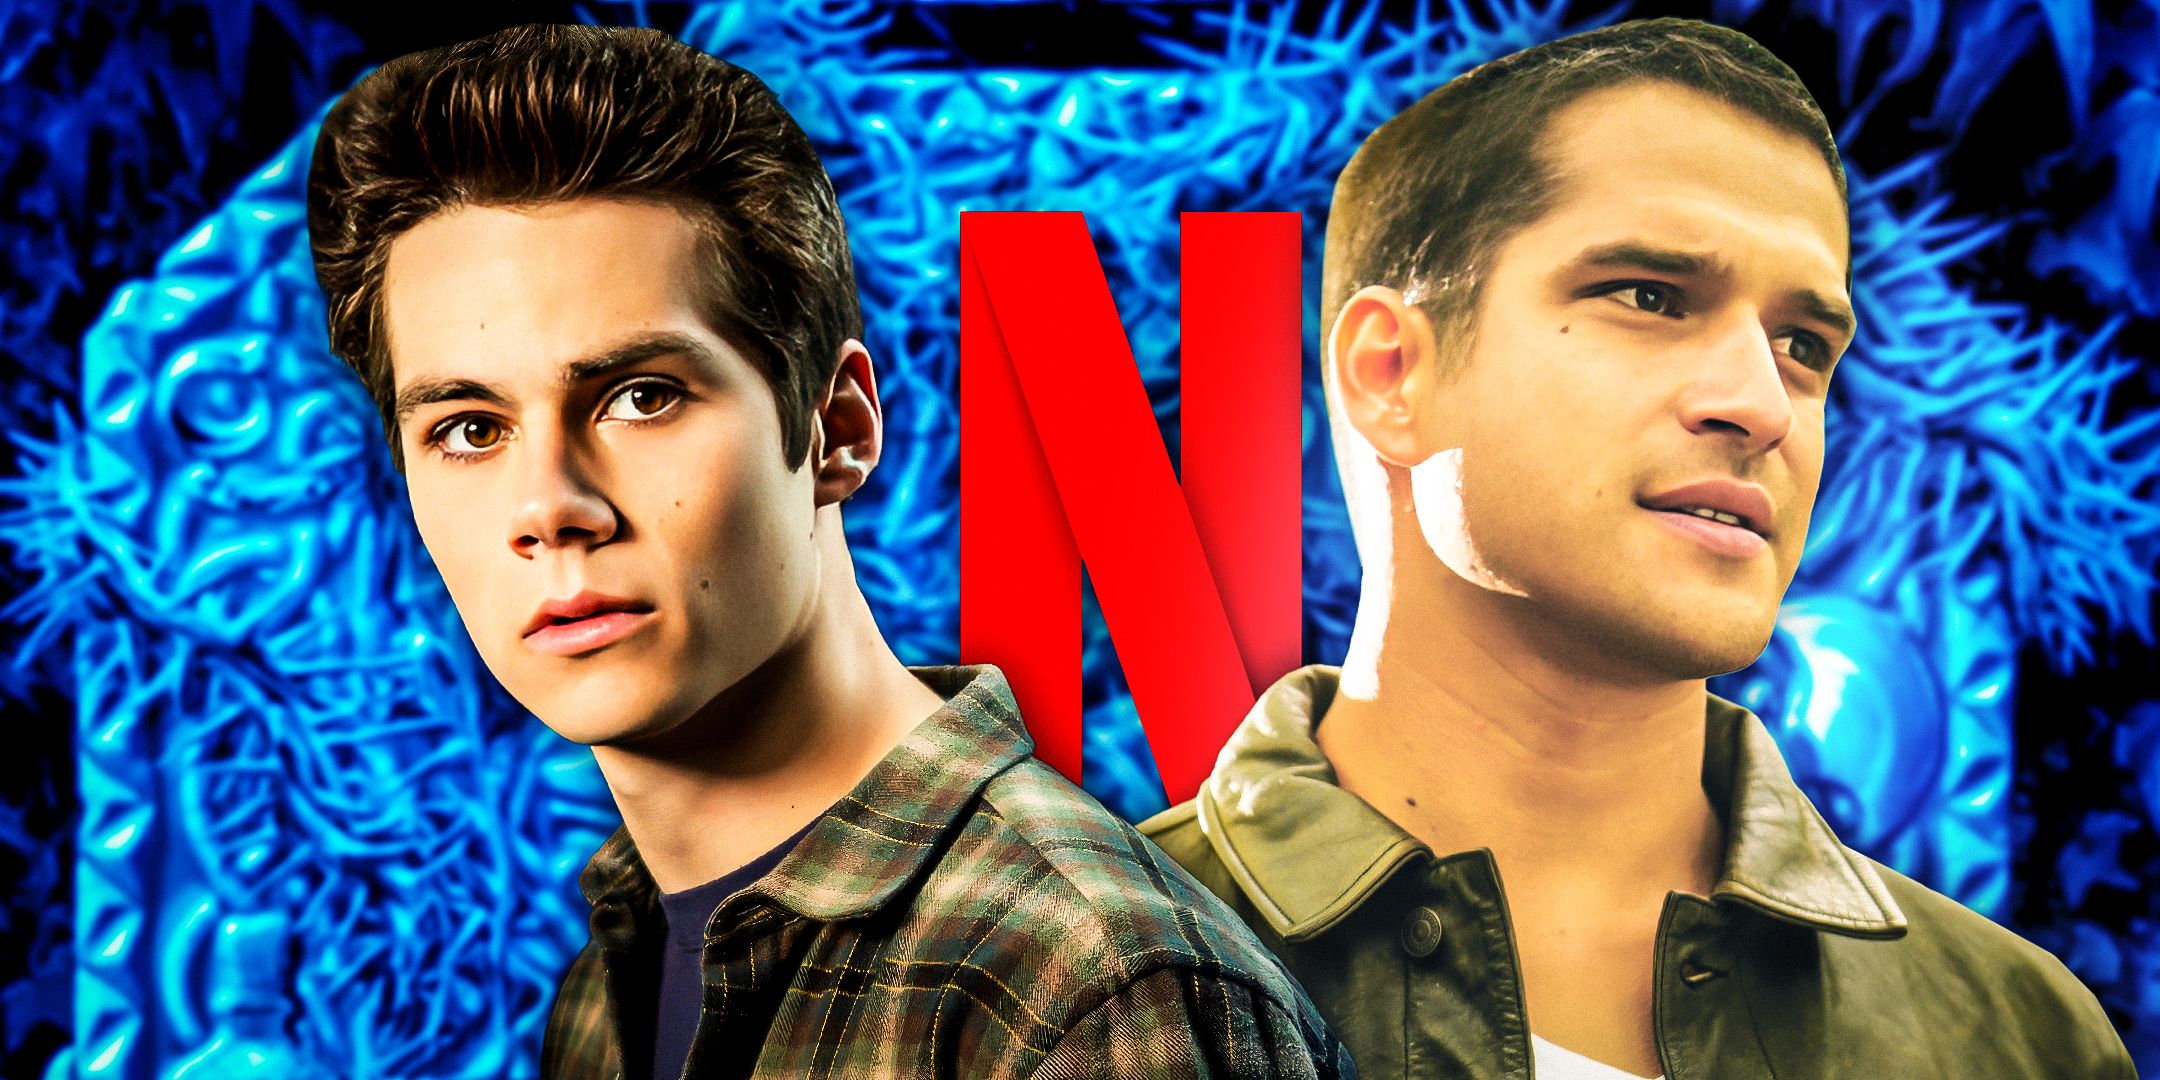 Tyler-Posey-as-Scott-McCall-and-Dylan-OBrien-as-Stiles-Stilinski-from-Teen-Wolf